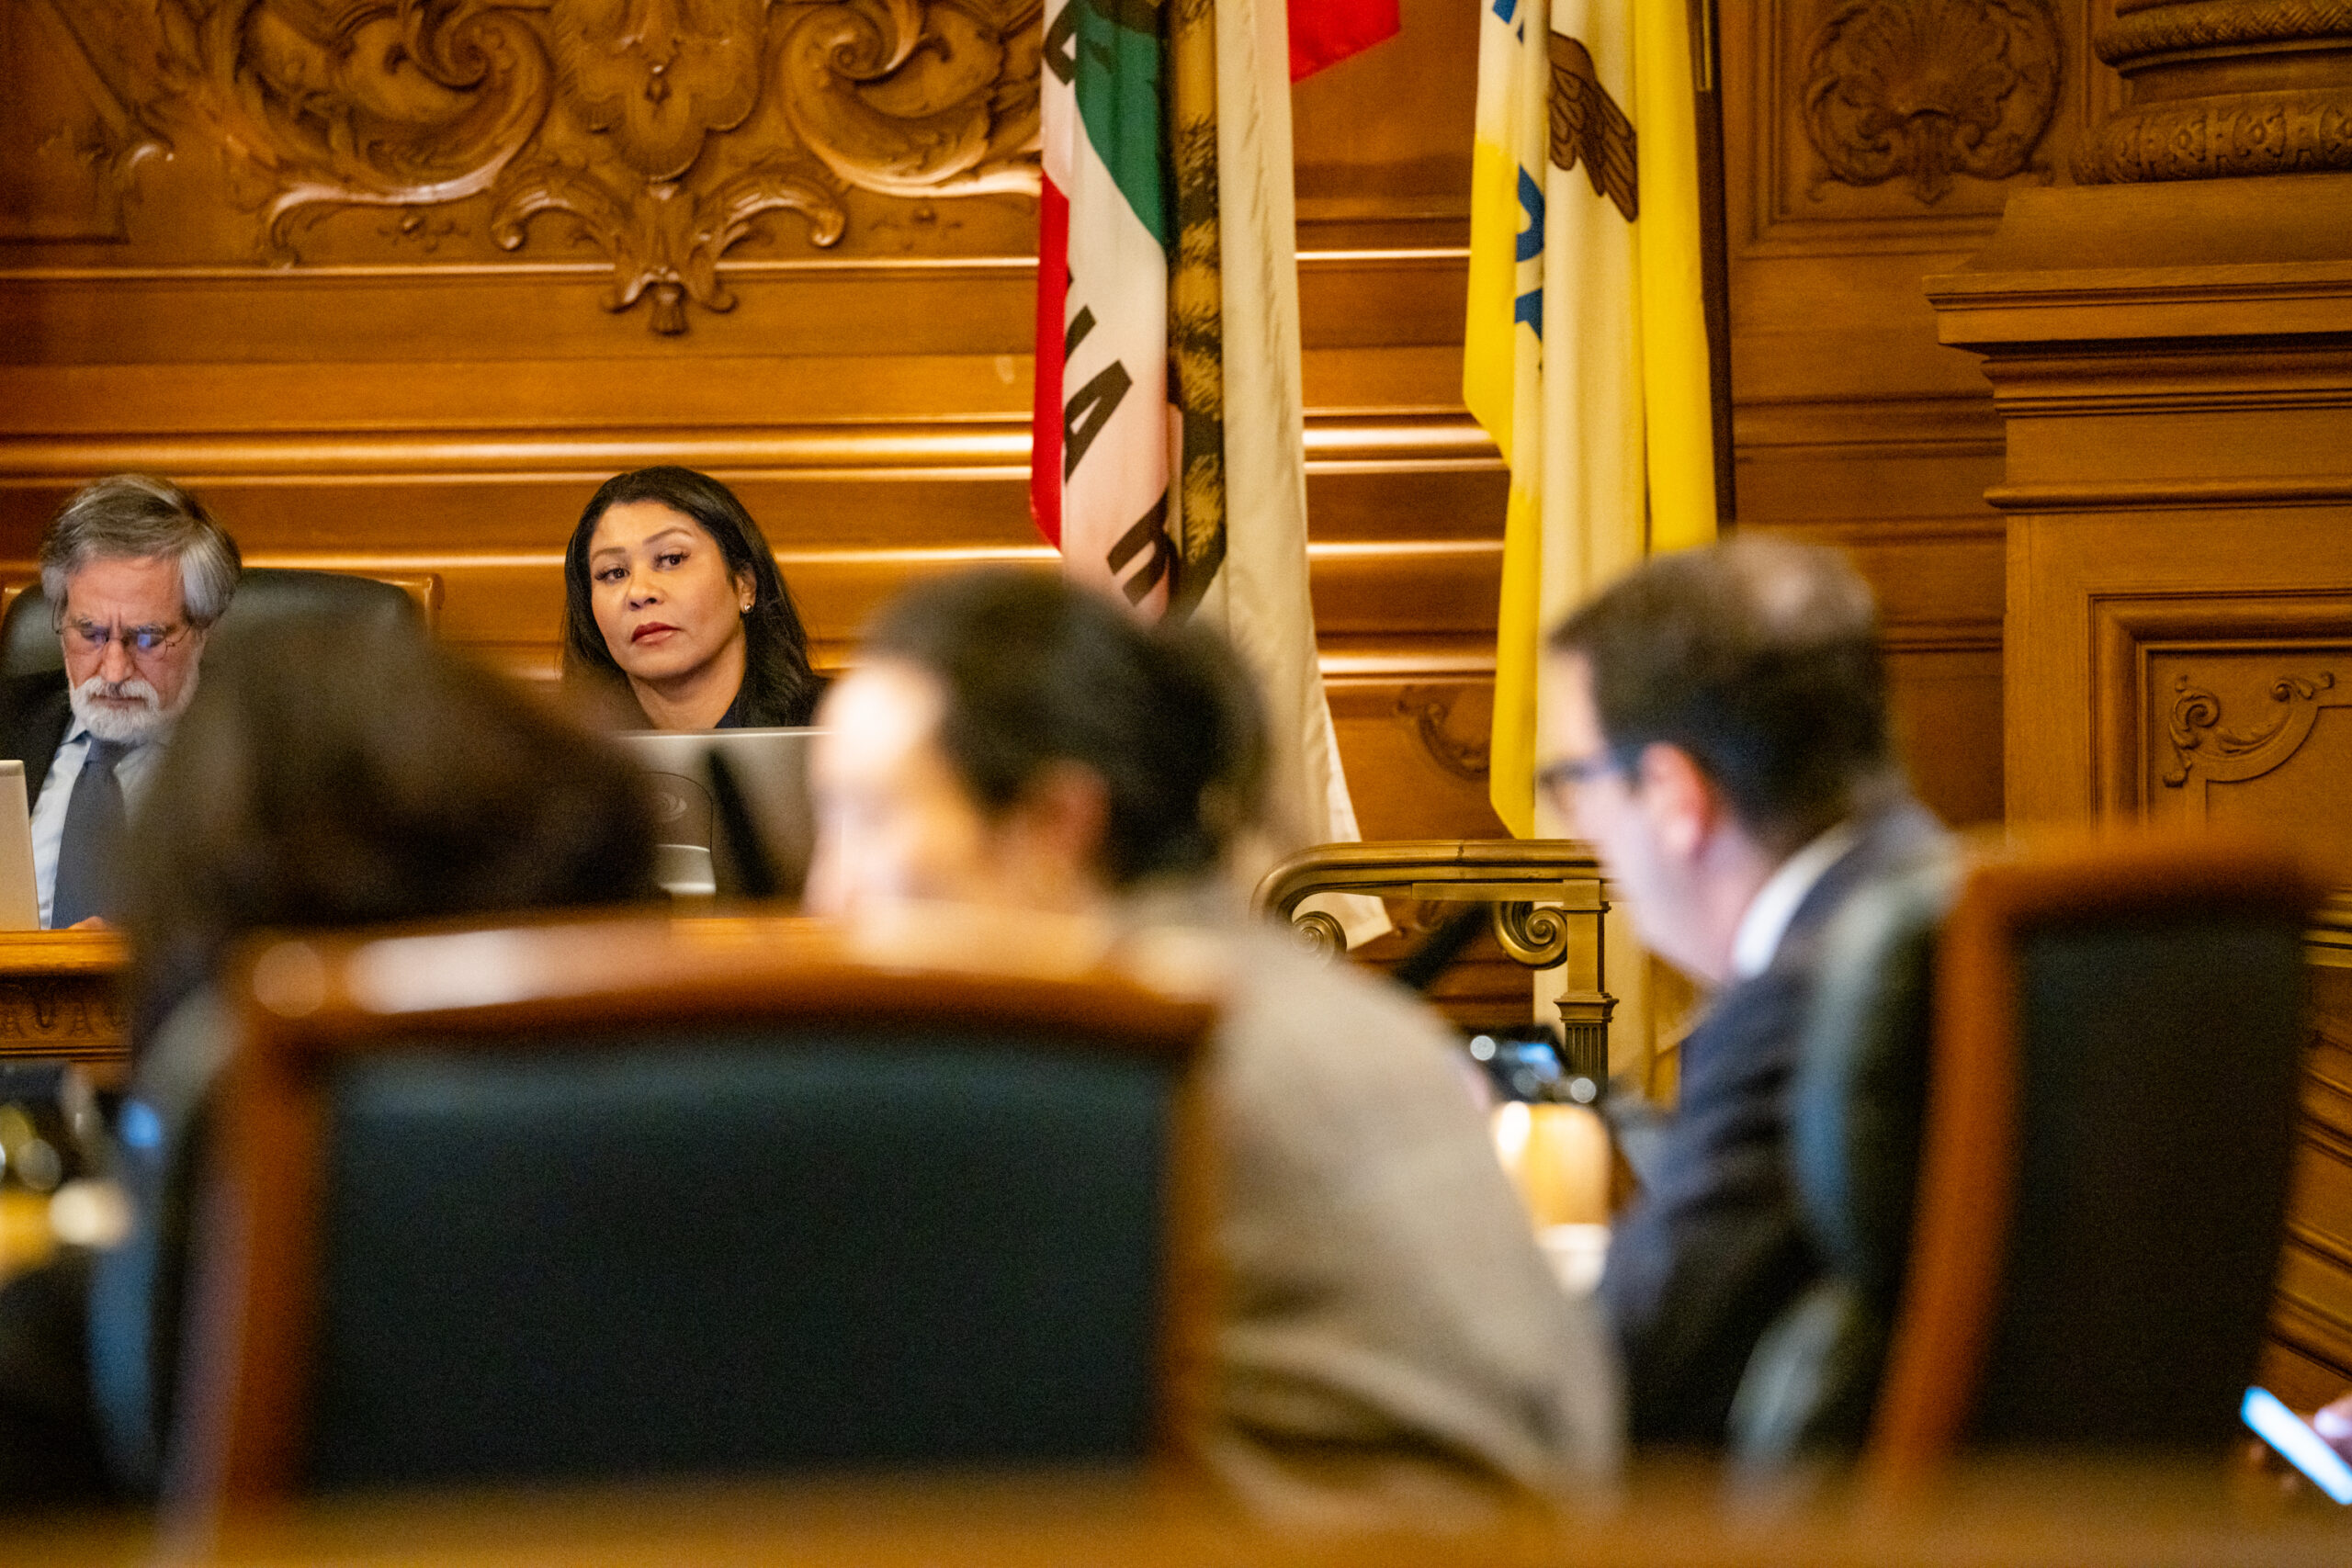 Watch How the $25 Million SFPD Overtime Debate Went Down